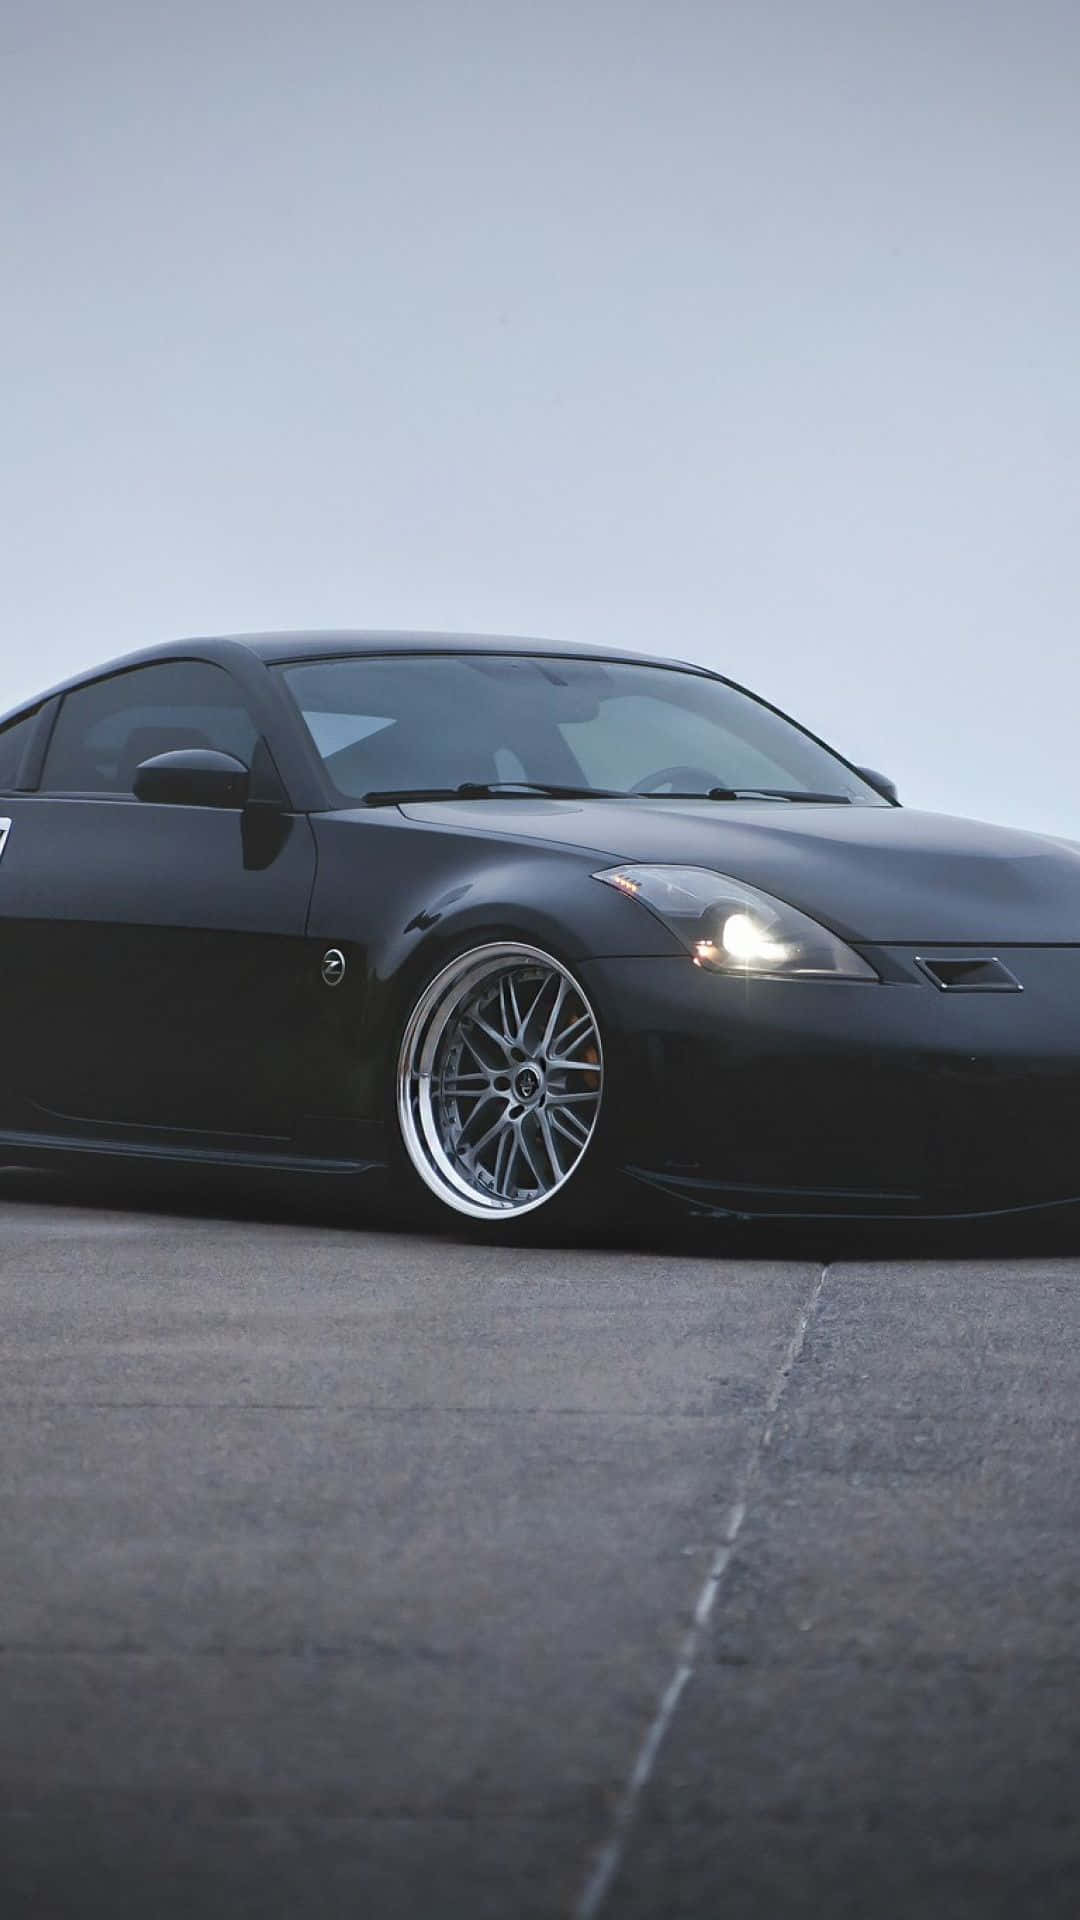 Enjoy the ride with the sleek and stylish Nissan 350Z Wallpaper